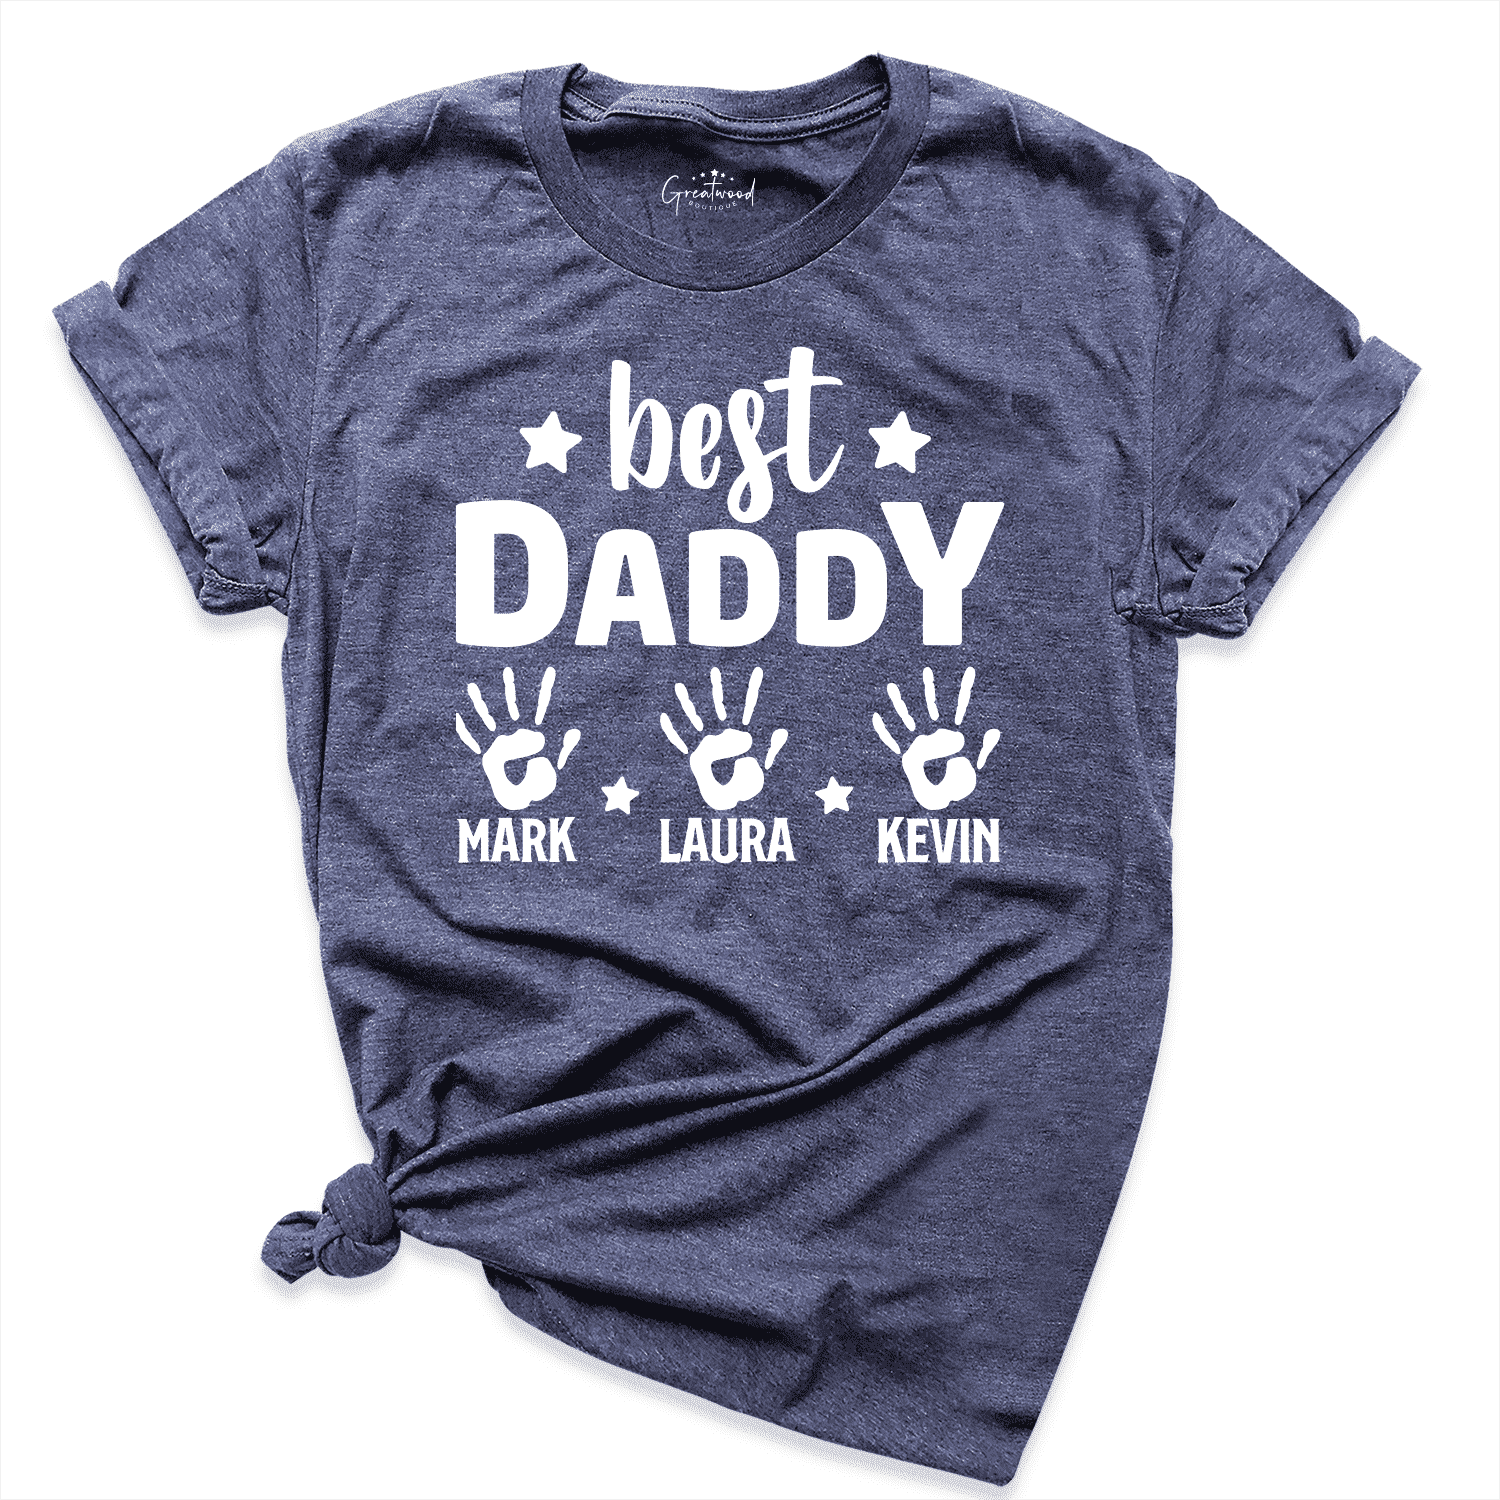 Best Daddy Custom Shirt Navy - Greatwood Boutique